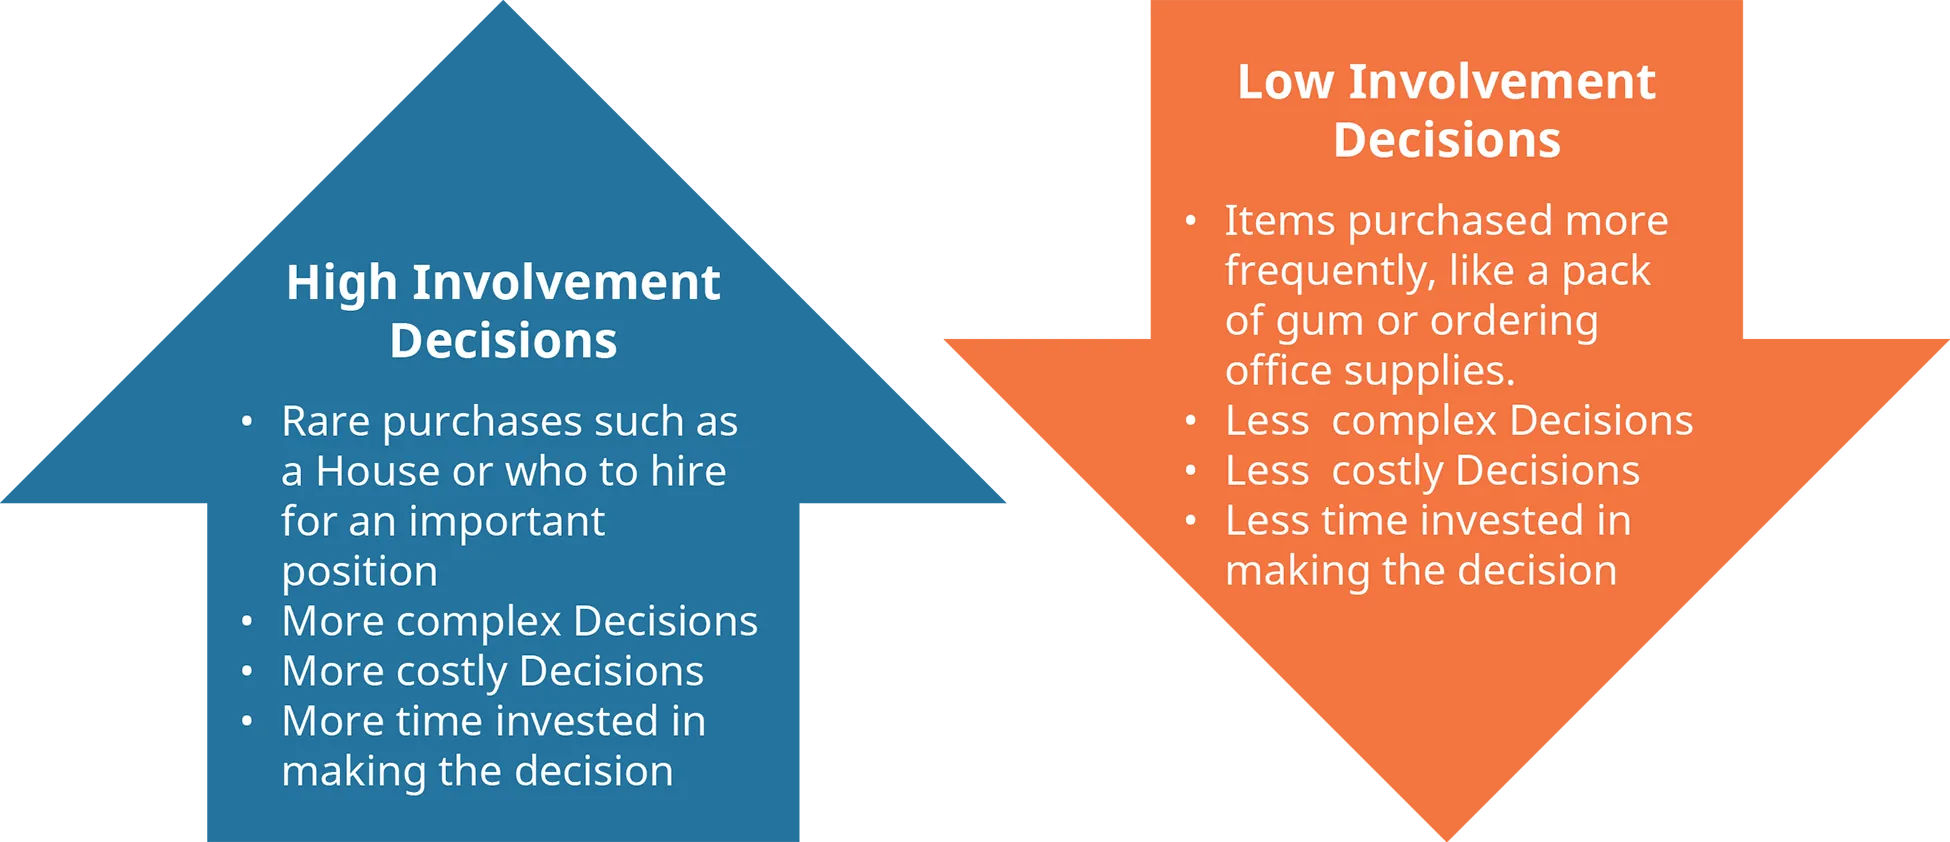 A diagram illustrates the different characteristics of high-involvement and low-involvement decisions.